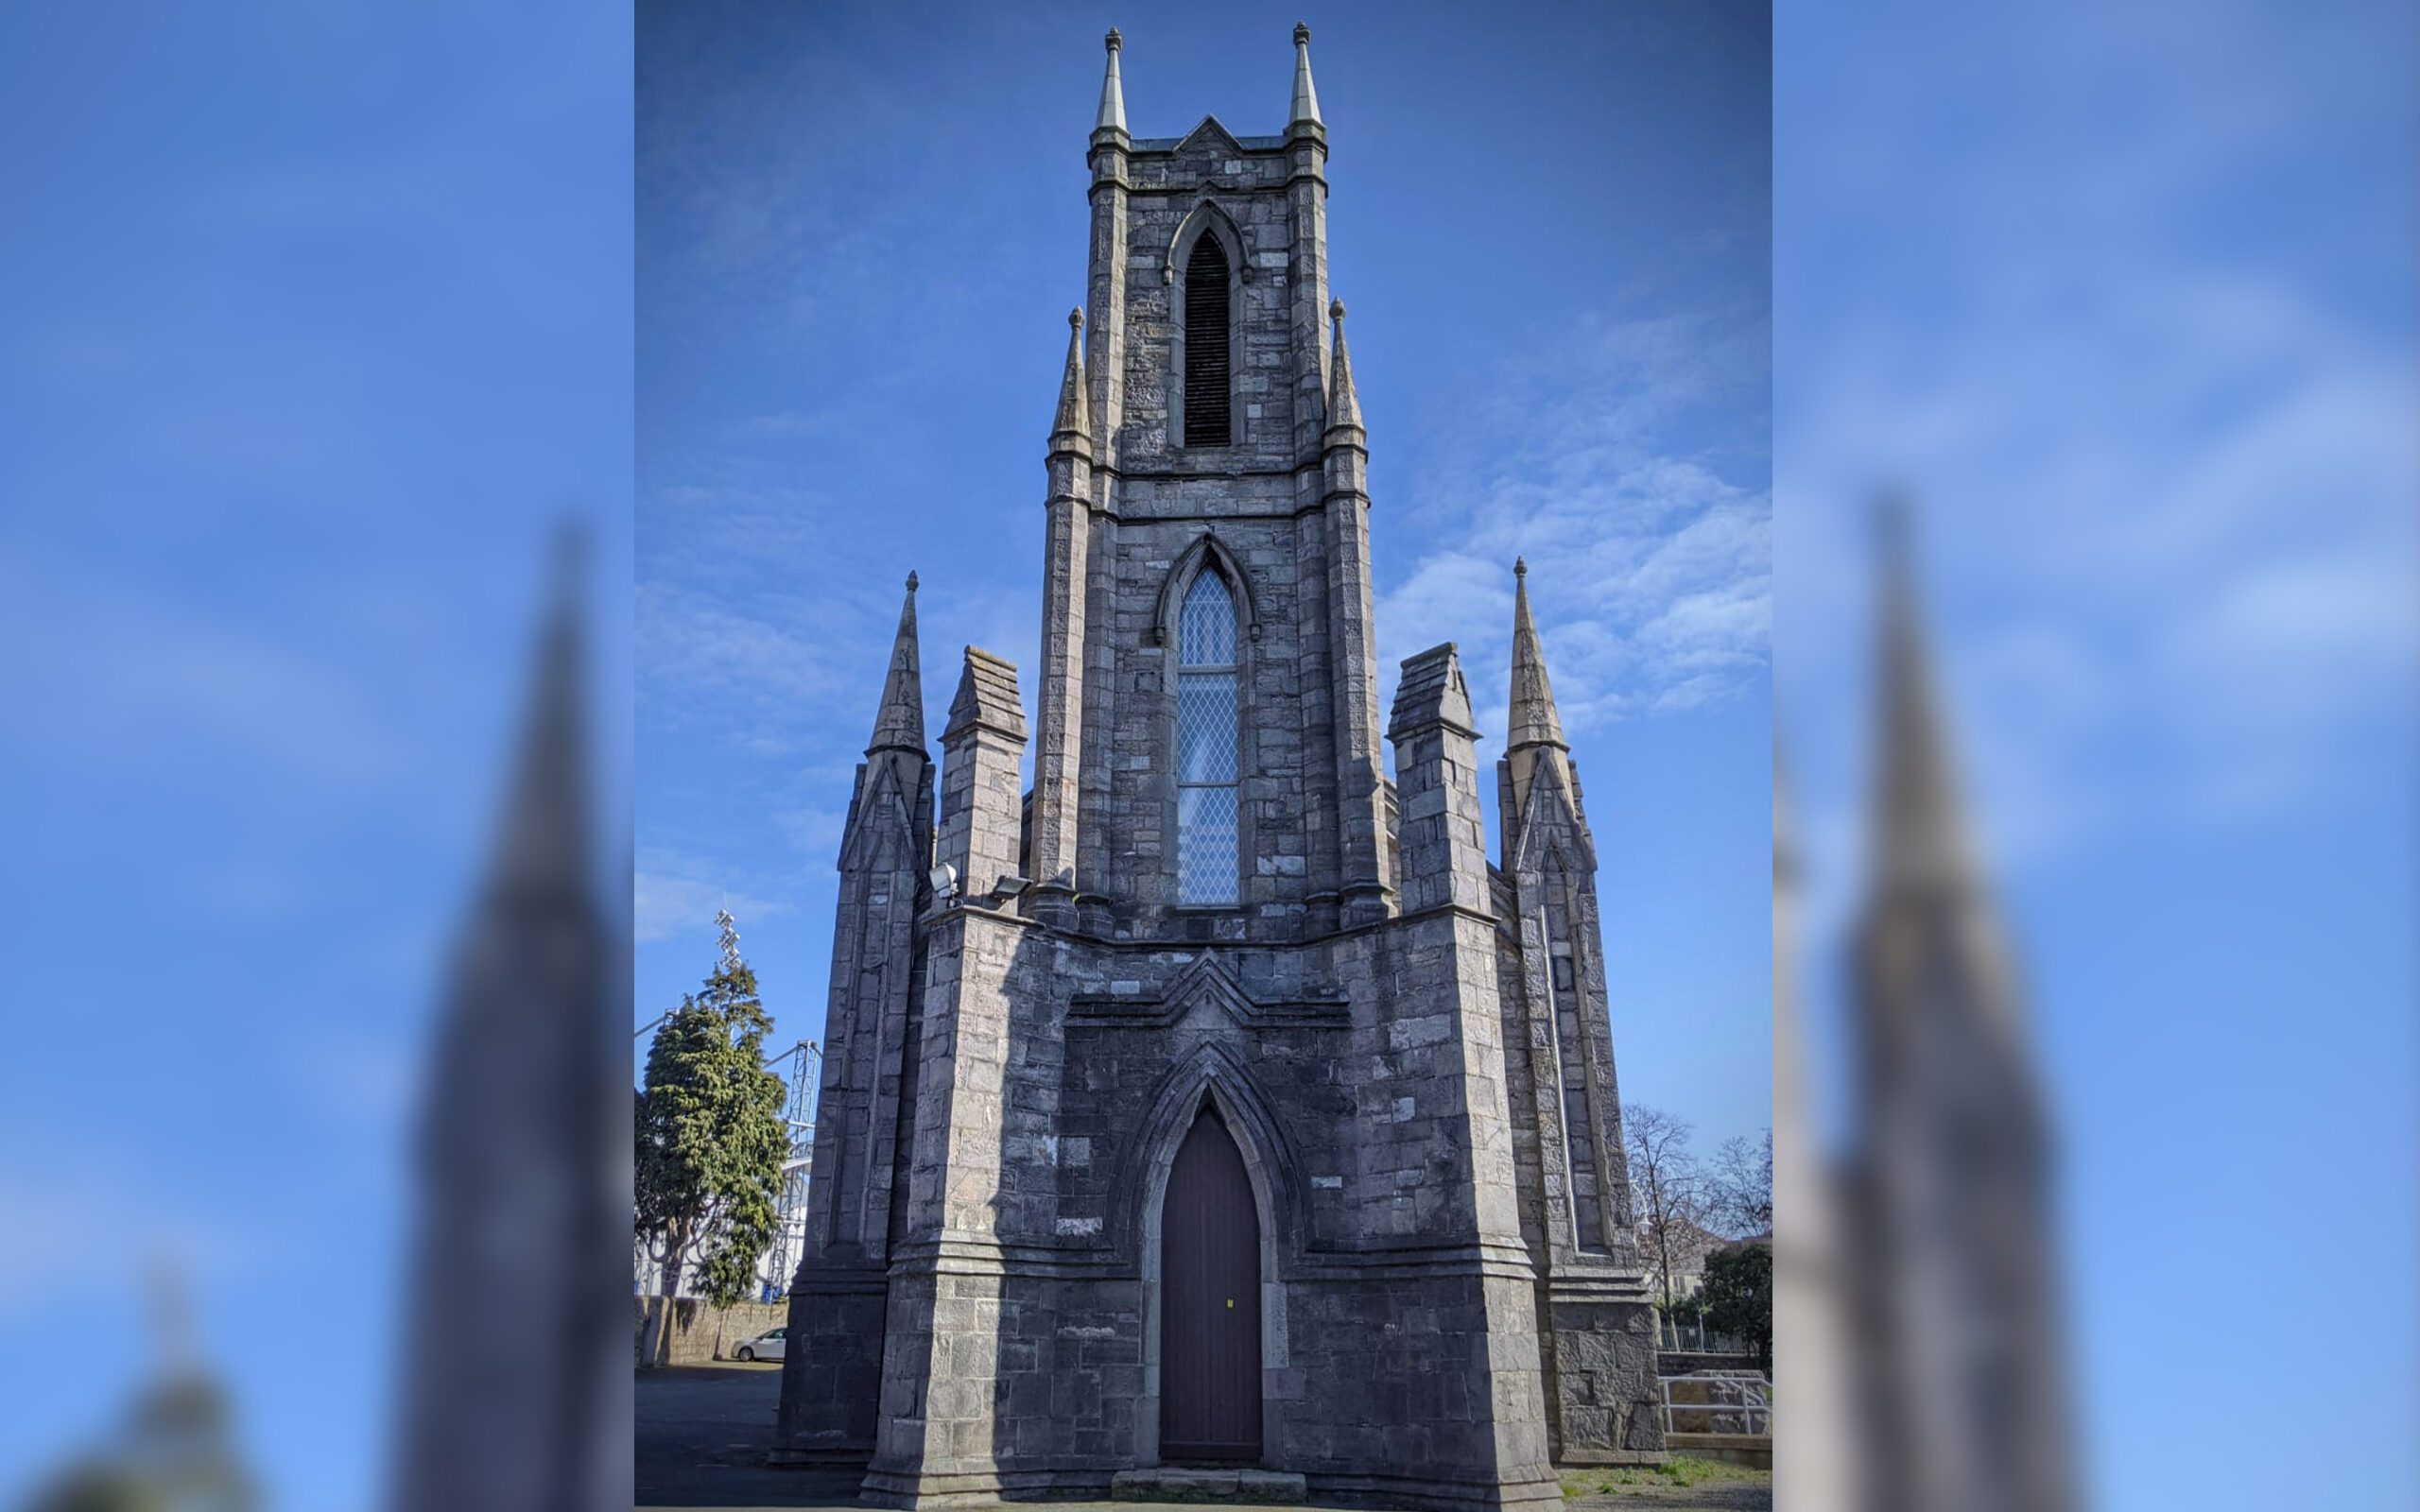 St Mary’s Church in Donnybrook, County Dublin featuring a war memorial dedicated to those fallen in WWI.